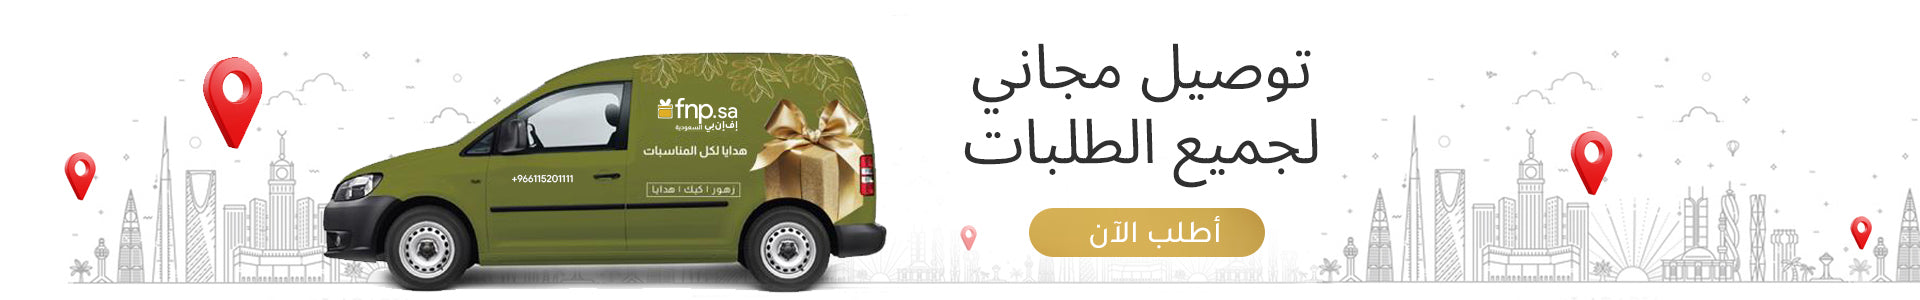 Dsite_Arabic_free_delivery_banner_new_2